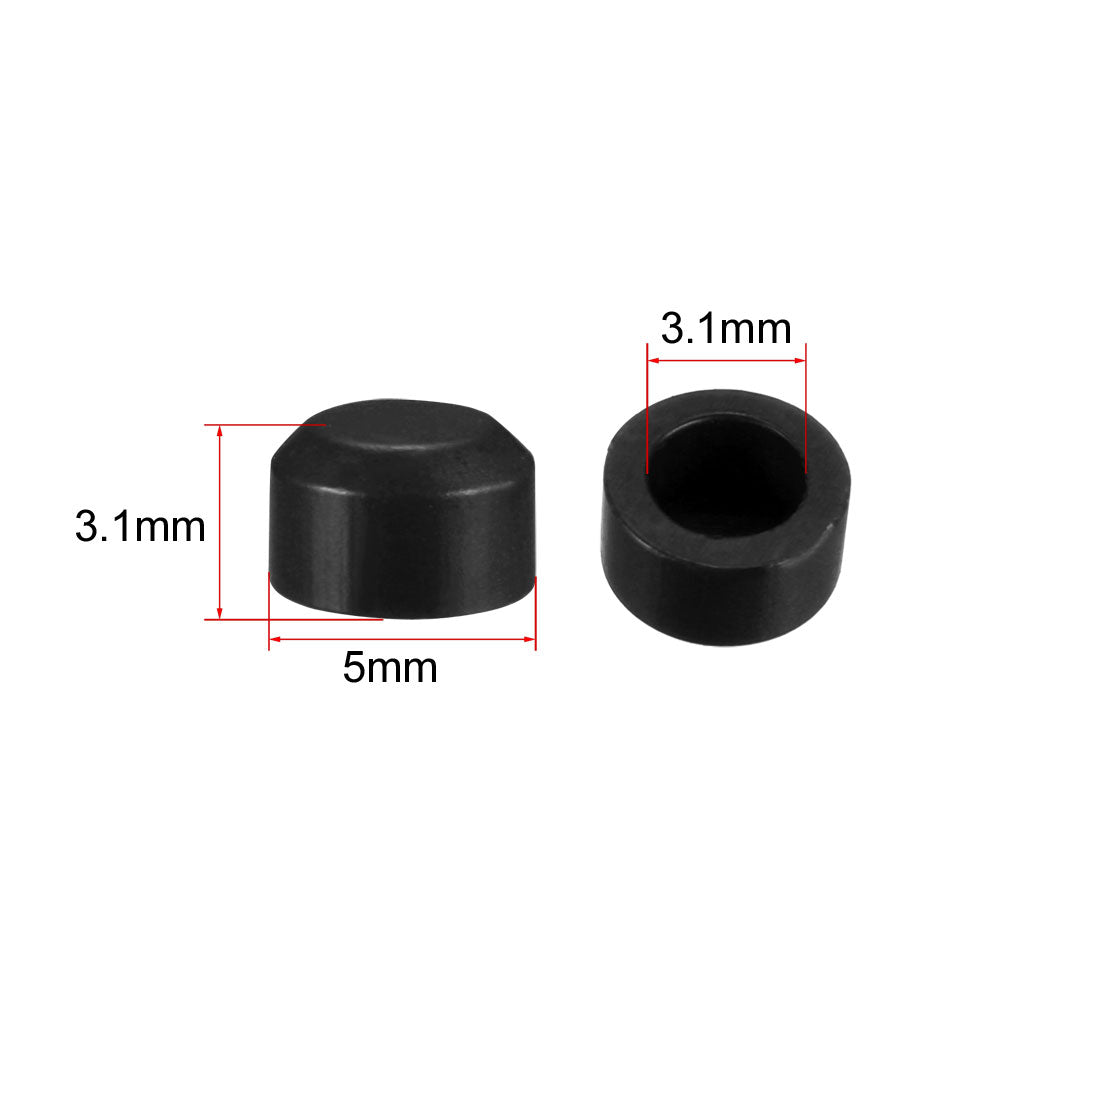 uxcell Uxcell 25pcs 3.1mm Hole Dia Plastic Pushbutton Tactile Switch Caps Cover Keycaps Protector Black for 6x6 Tact Switch